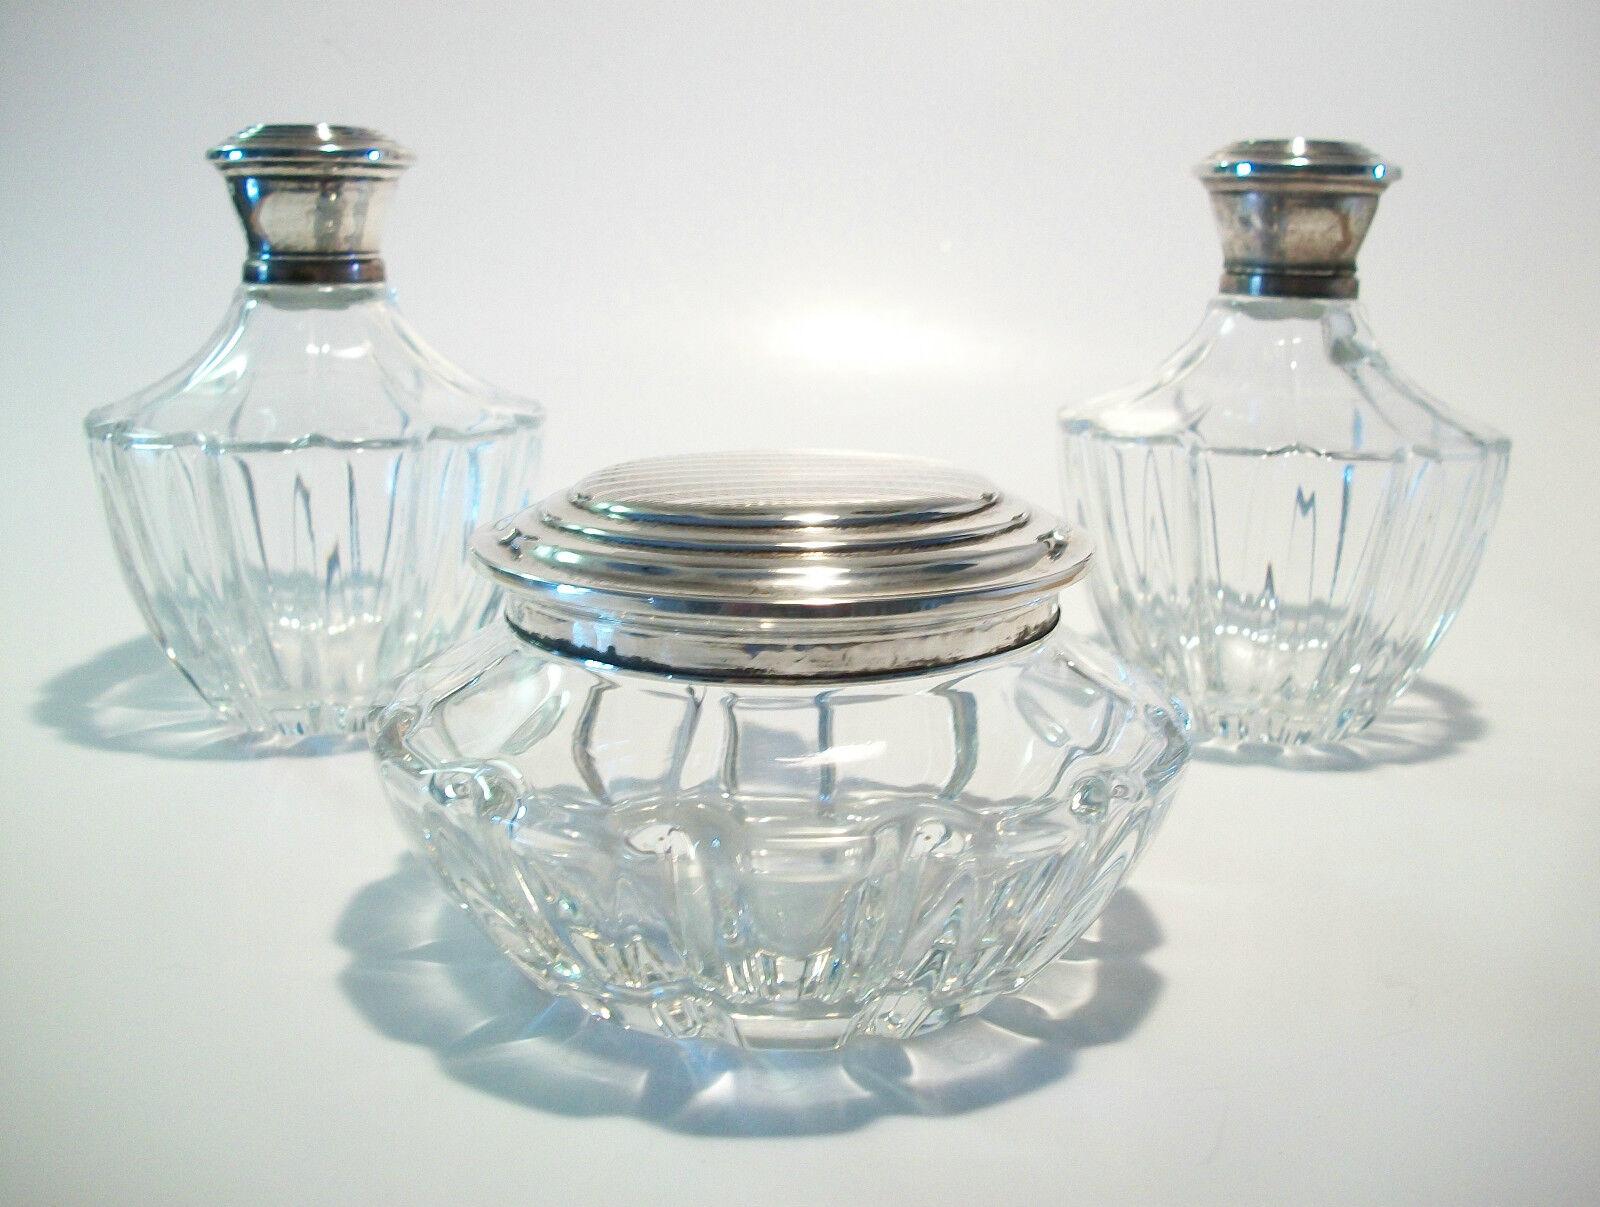 Vintage Three Piece Vanity Set - Silver Plate & Crystal - Early 20th Century In Fair Condition For Sale In Chatham, ON